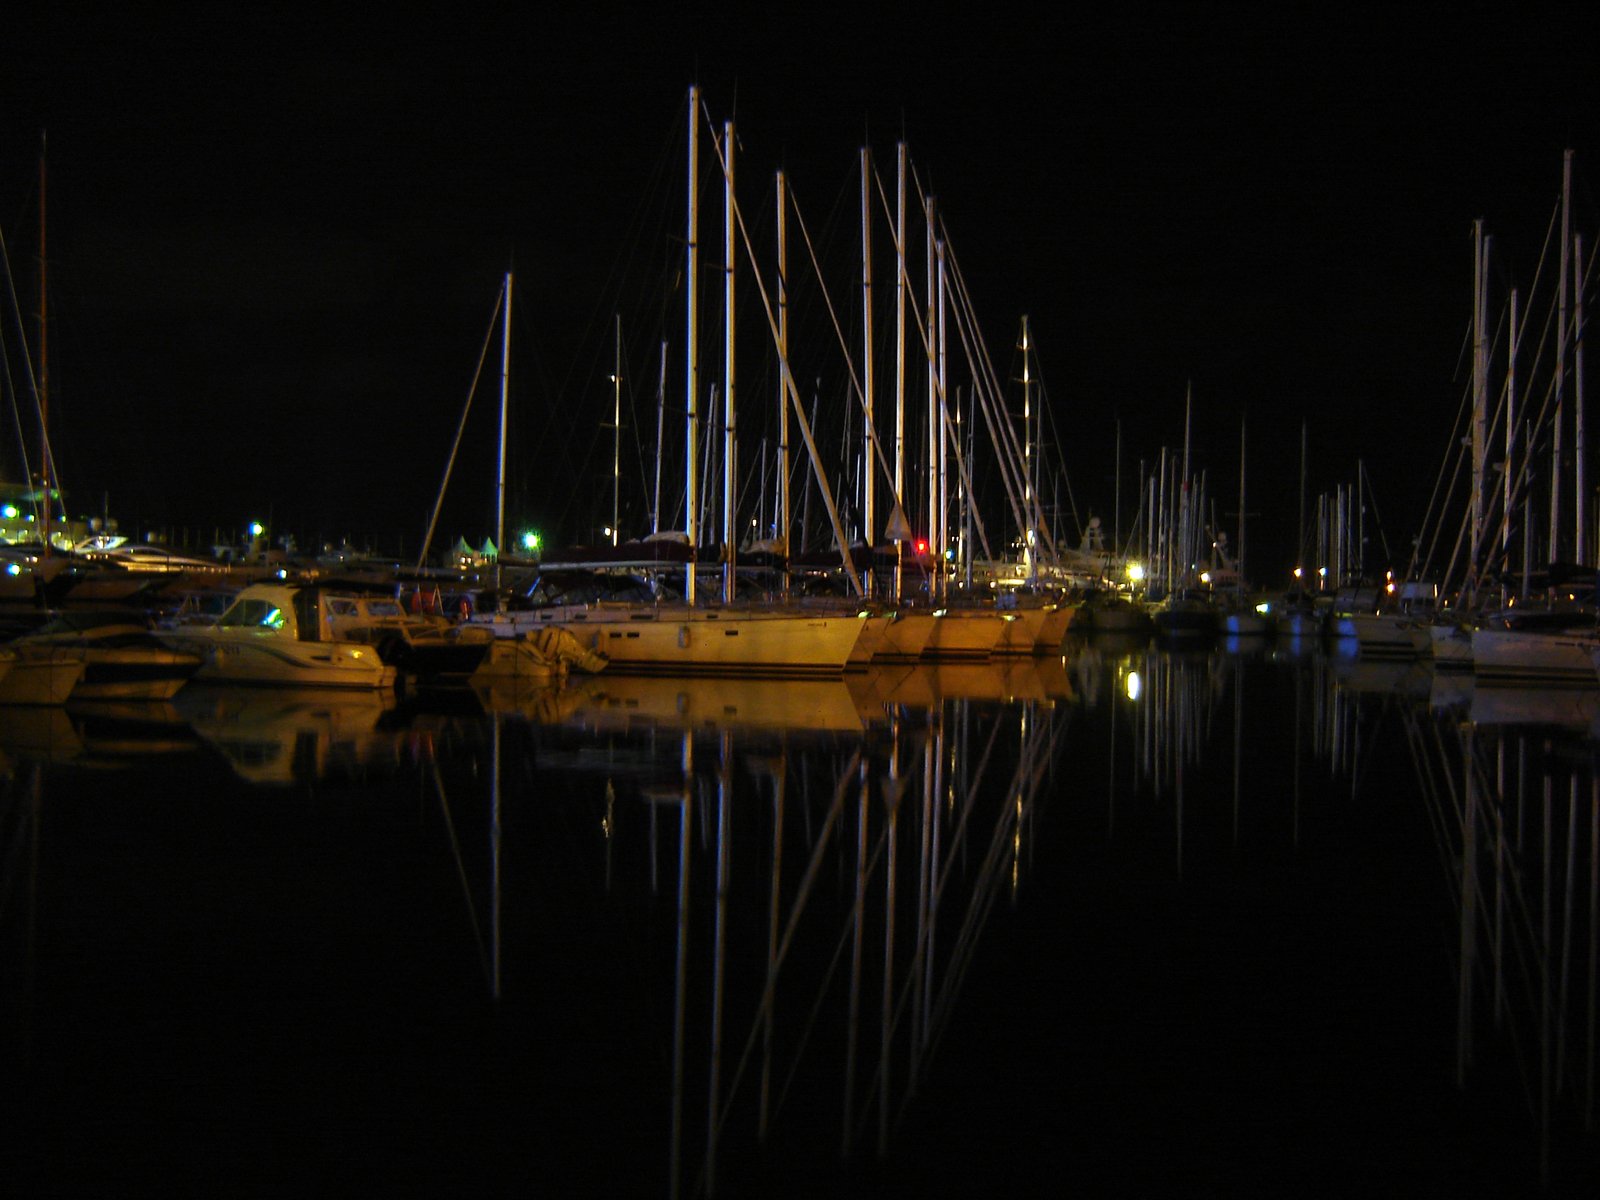 a harbor with some boats sitting parked in it